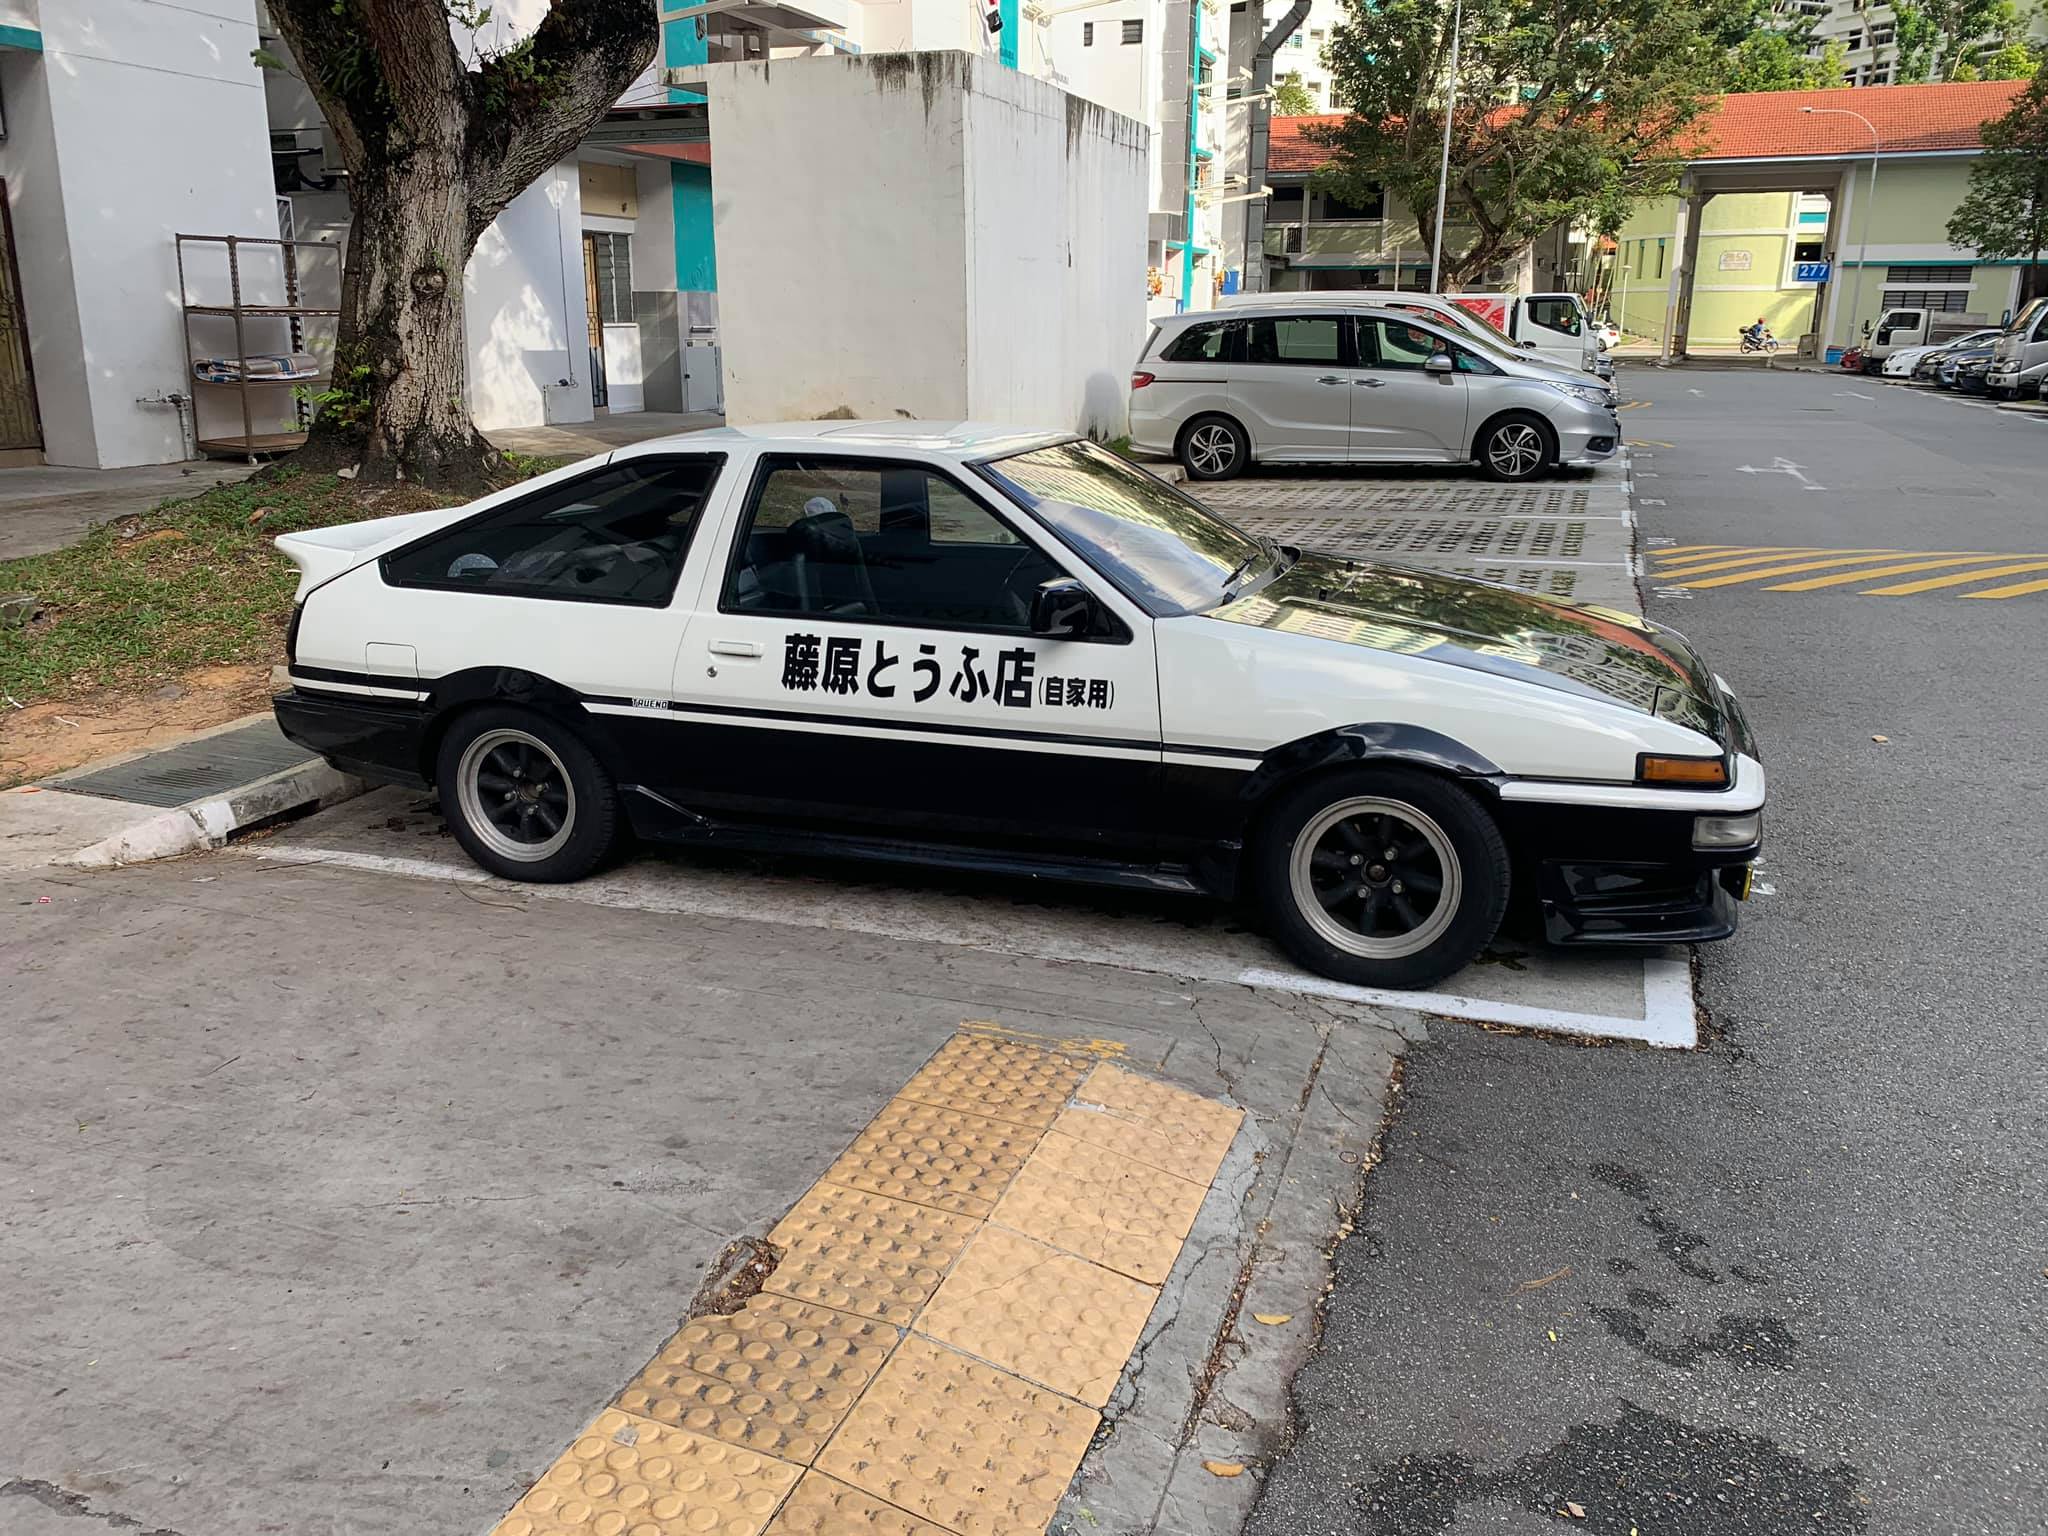 Legendary 19 Toyota Ae86 From Initial D Spotted At Bukit Batok Carpark Mothership Sg News From Singapore Asia And Around The World